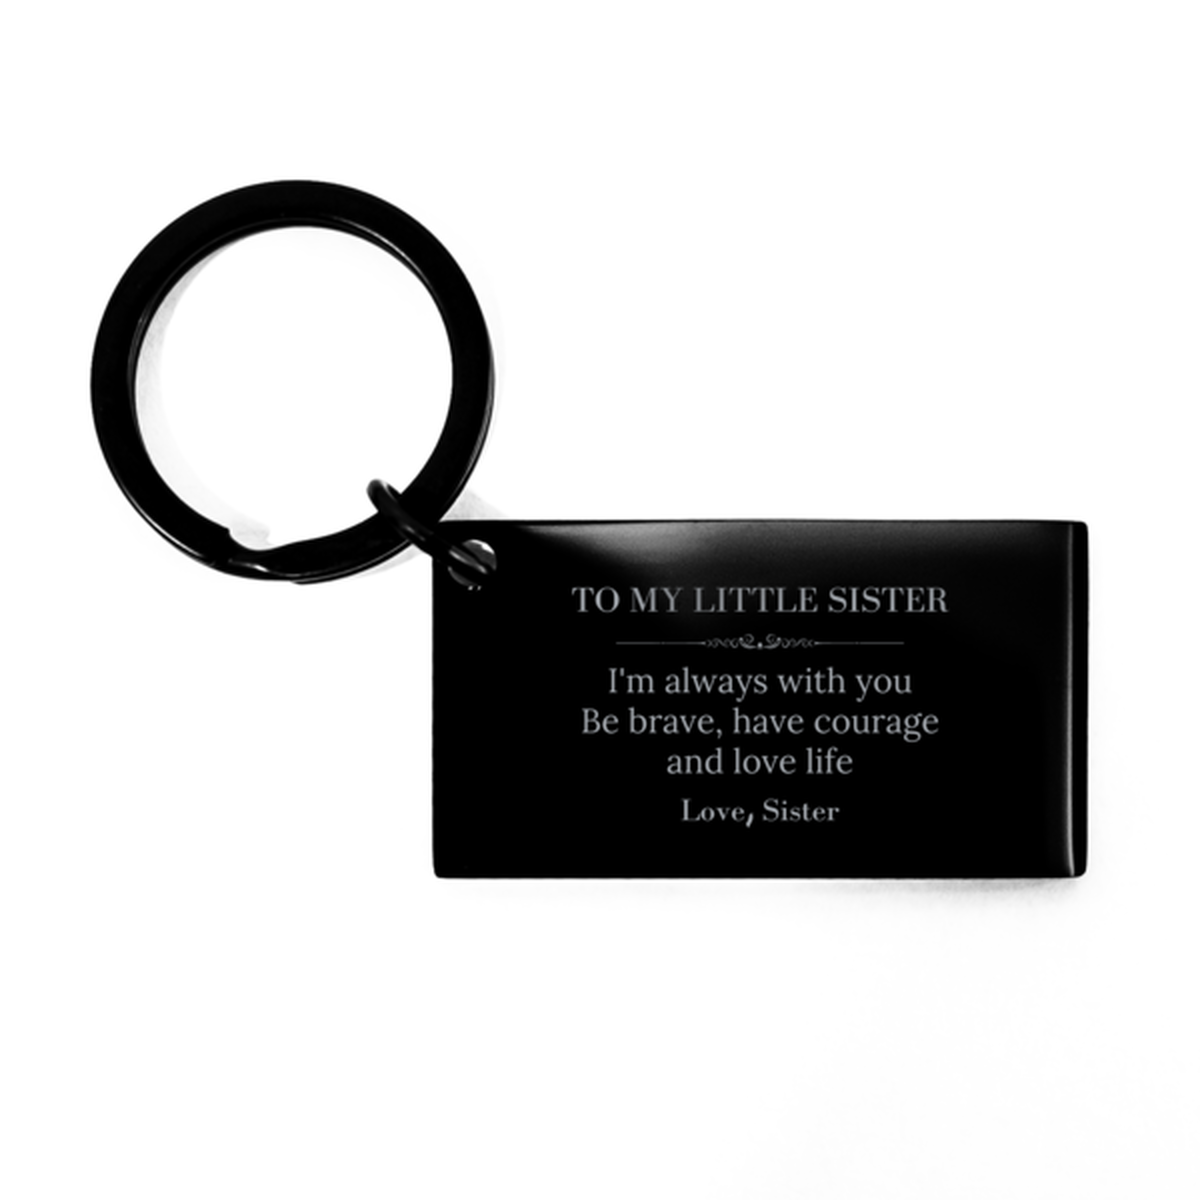 To My Little Sister Gifts from Sister, Unique Keychain Inspirational Christmas Birthday Graduation Gifts for Little Sister I'm always with you. Be brave, have courage and love life. Love, Sister